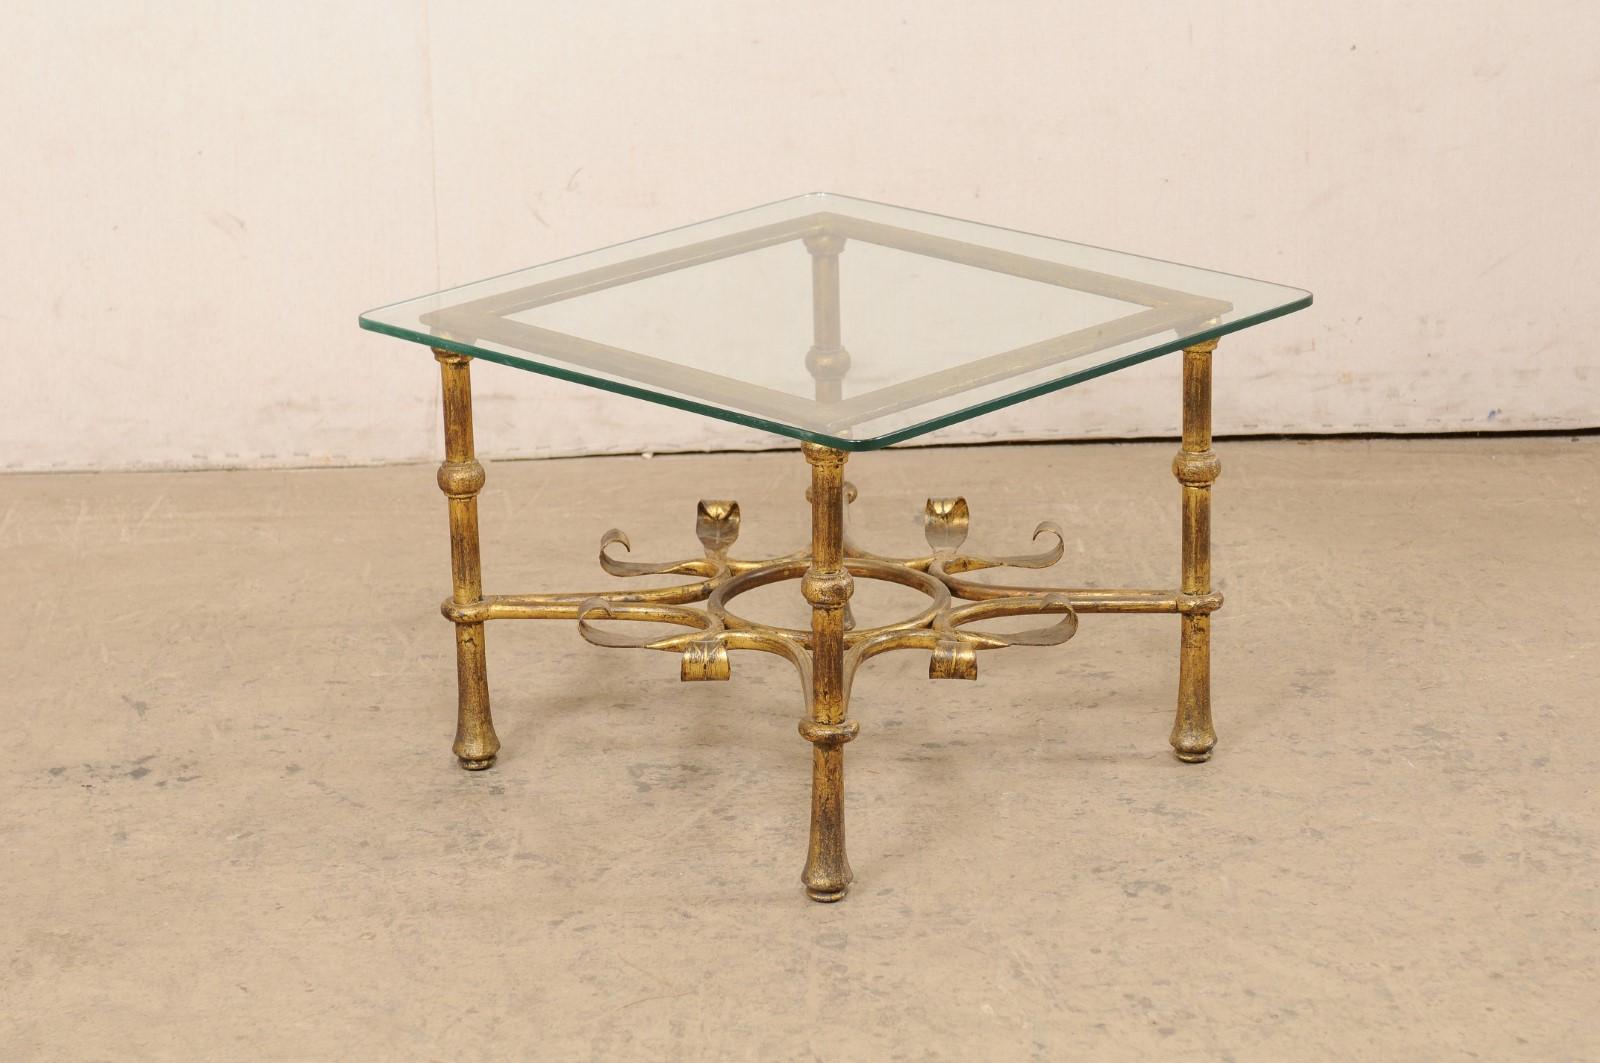 Spanish Accent Table with Gilt Iron Base & Square-Shaped Glass Top, Mid 20th C. For Sale 2